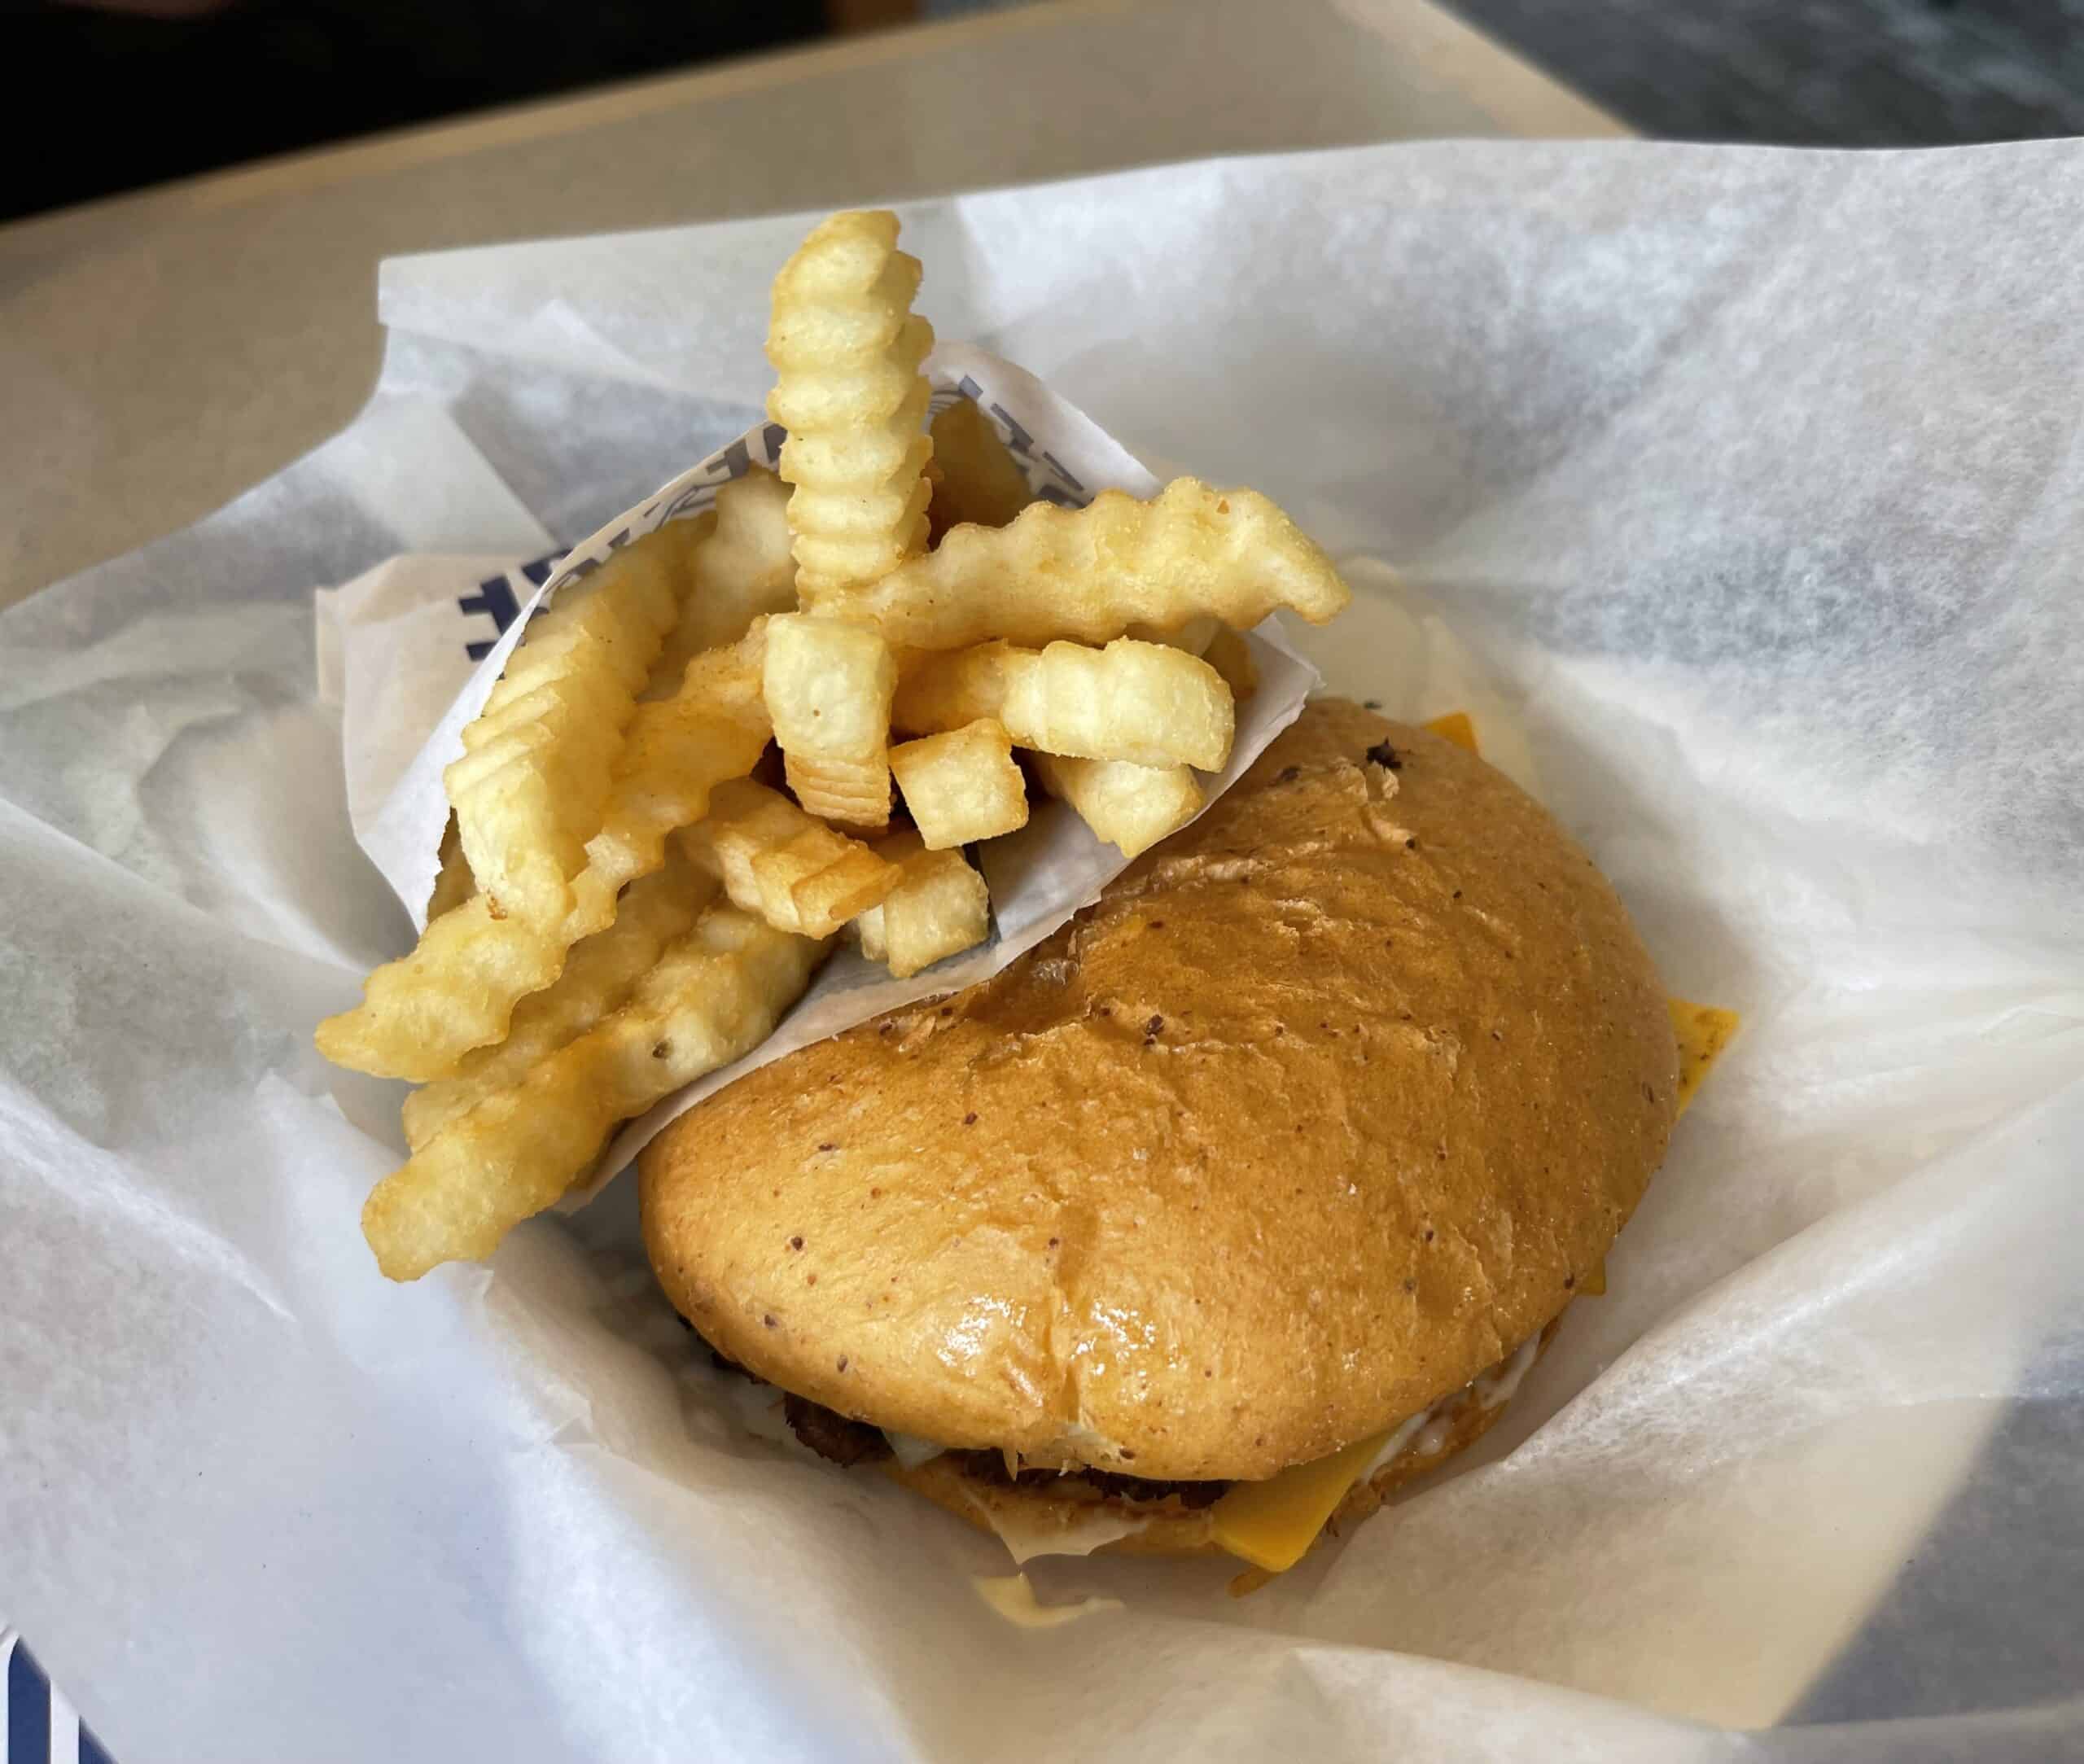 Culver's burger and fries